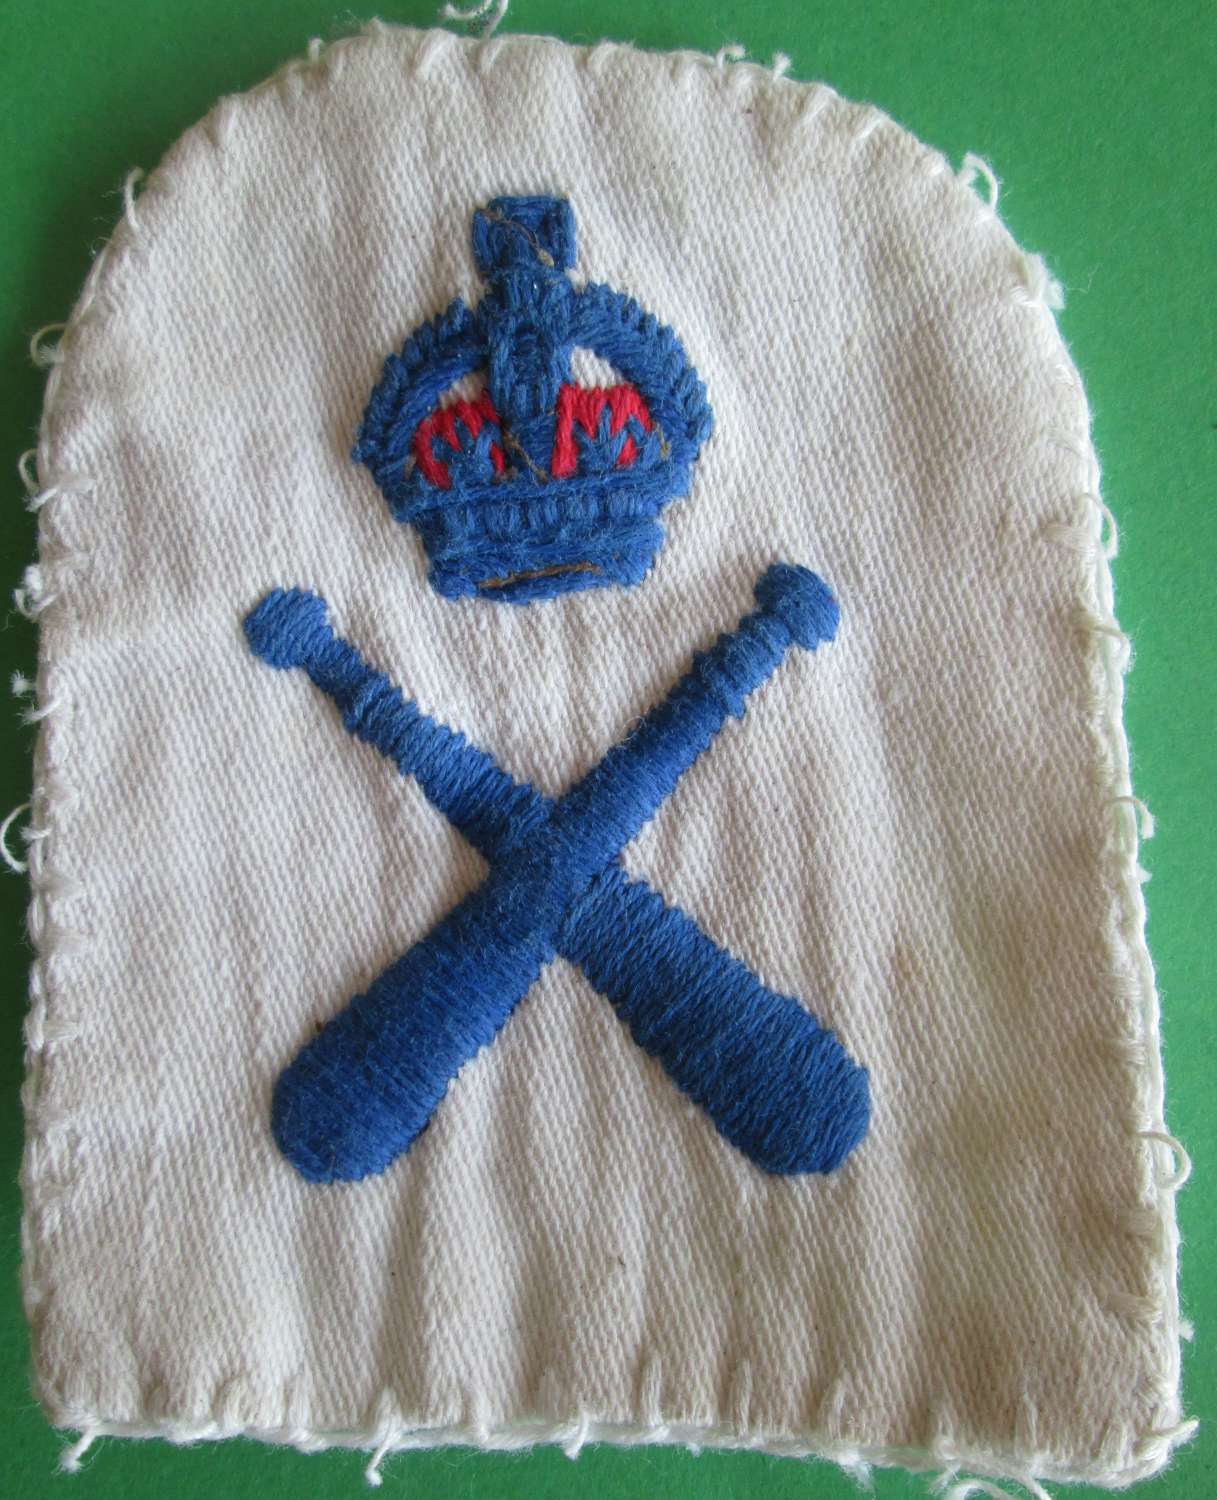 A WOVEN ROYAL NAVY PHYSICAL TRAINING INSTRUCTORS ARM BADGE